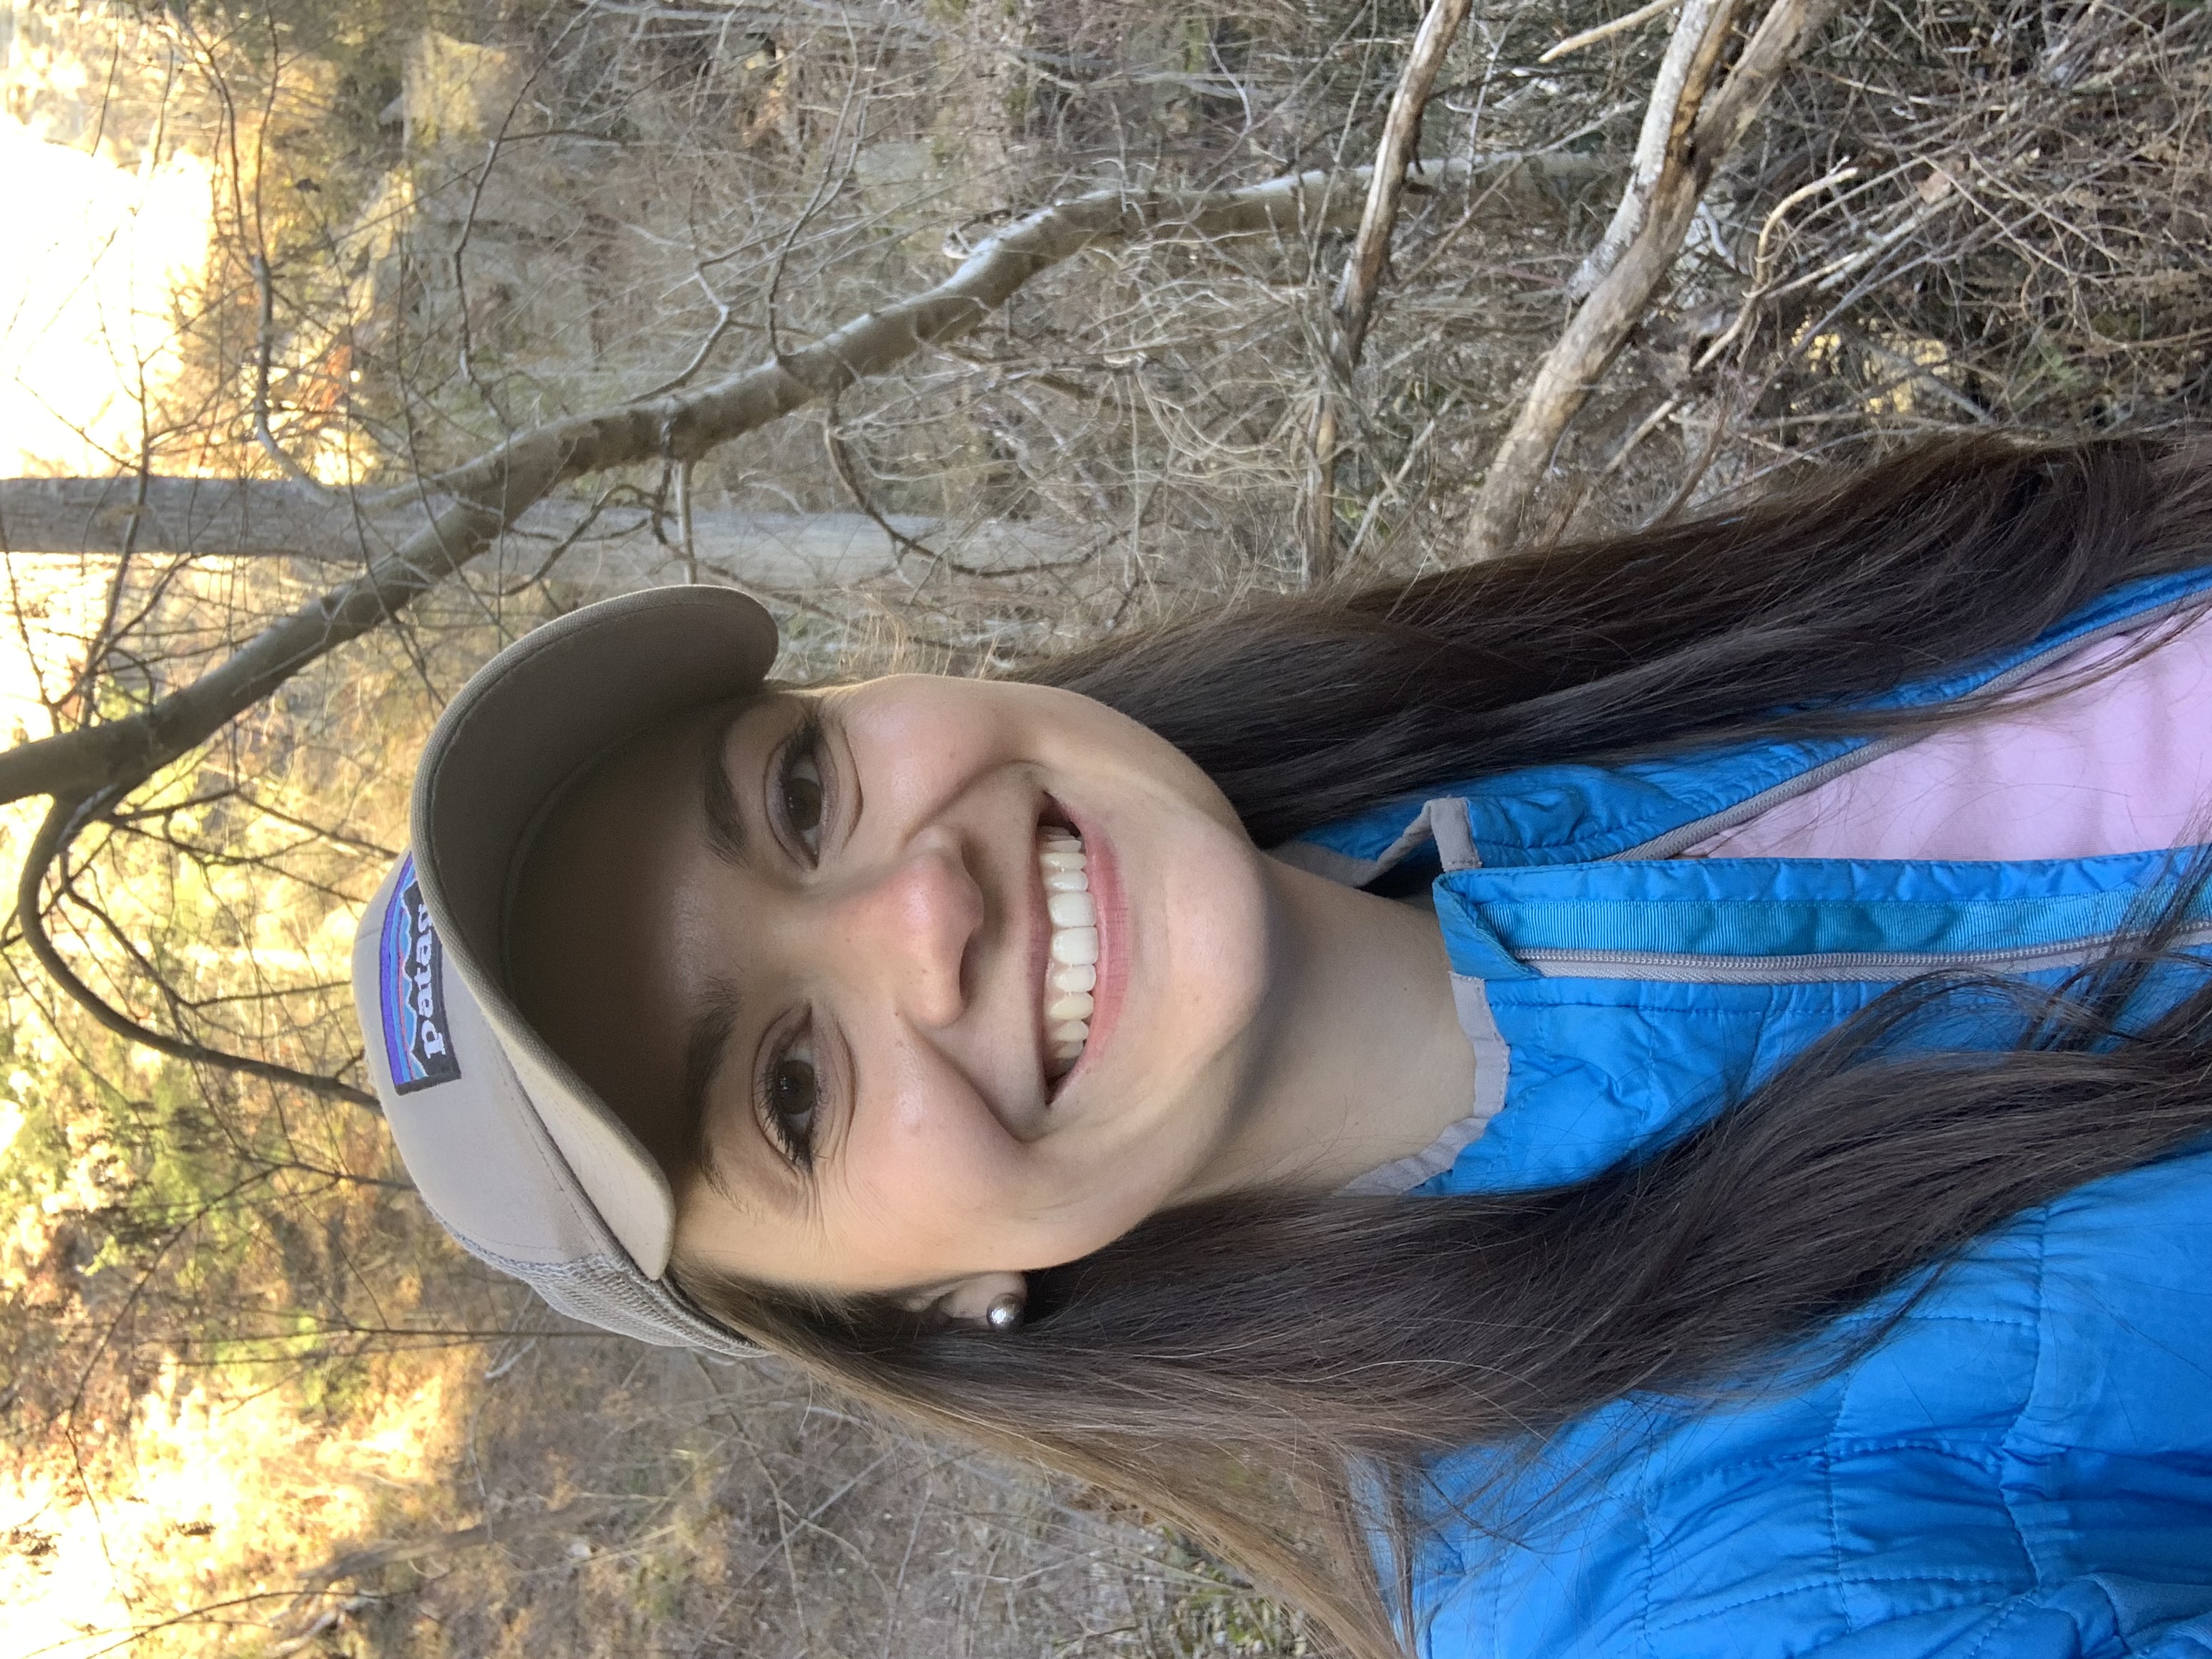 A smiling woman with long dark hair wearing a tan ballcap and blue jacket takes a selfie in a forest